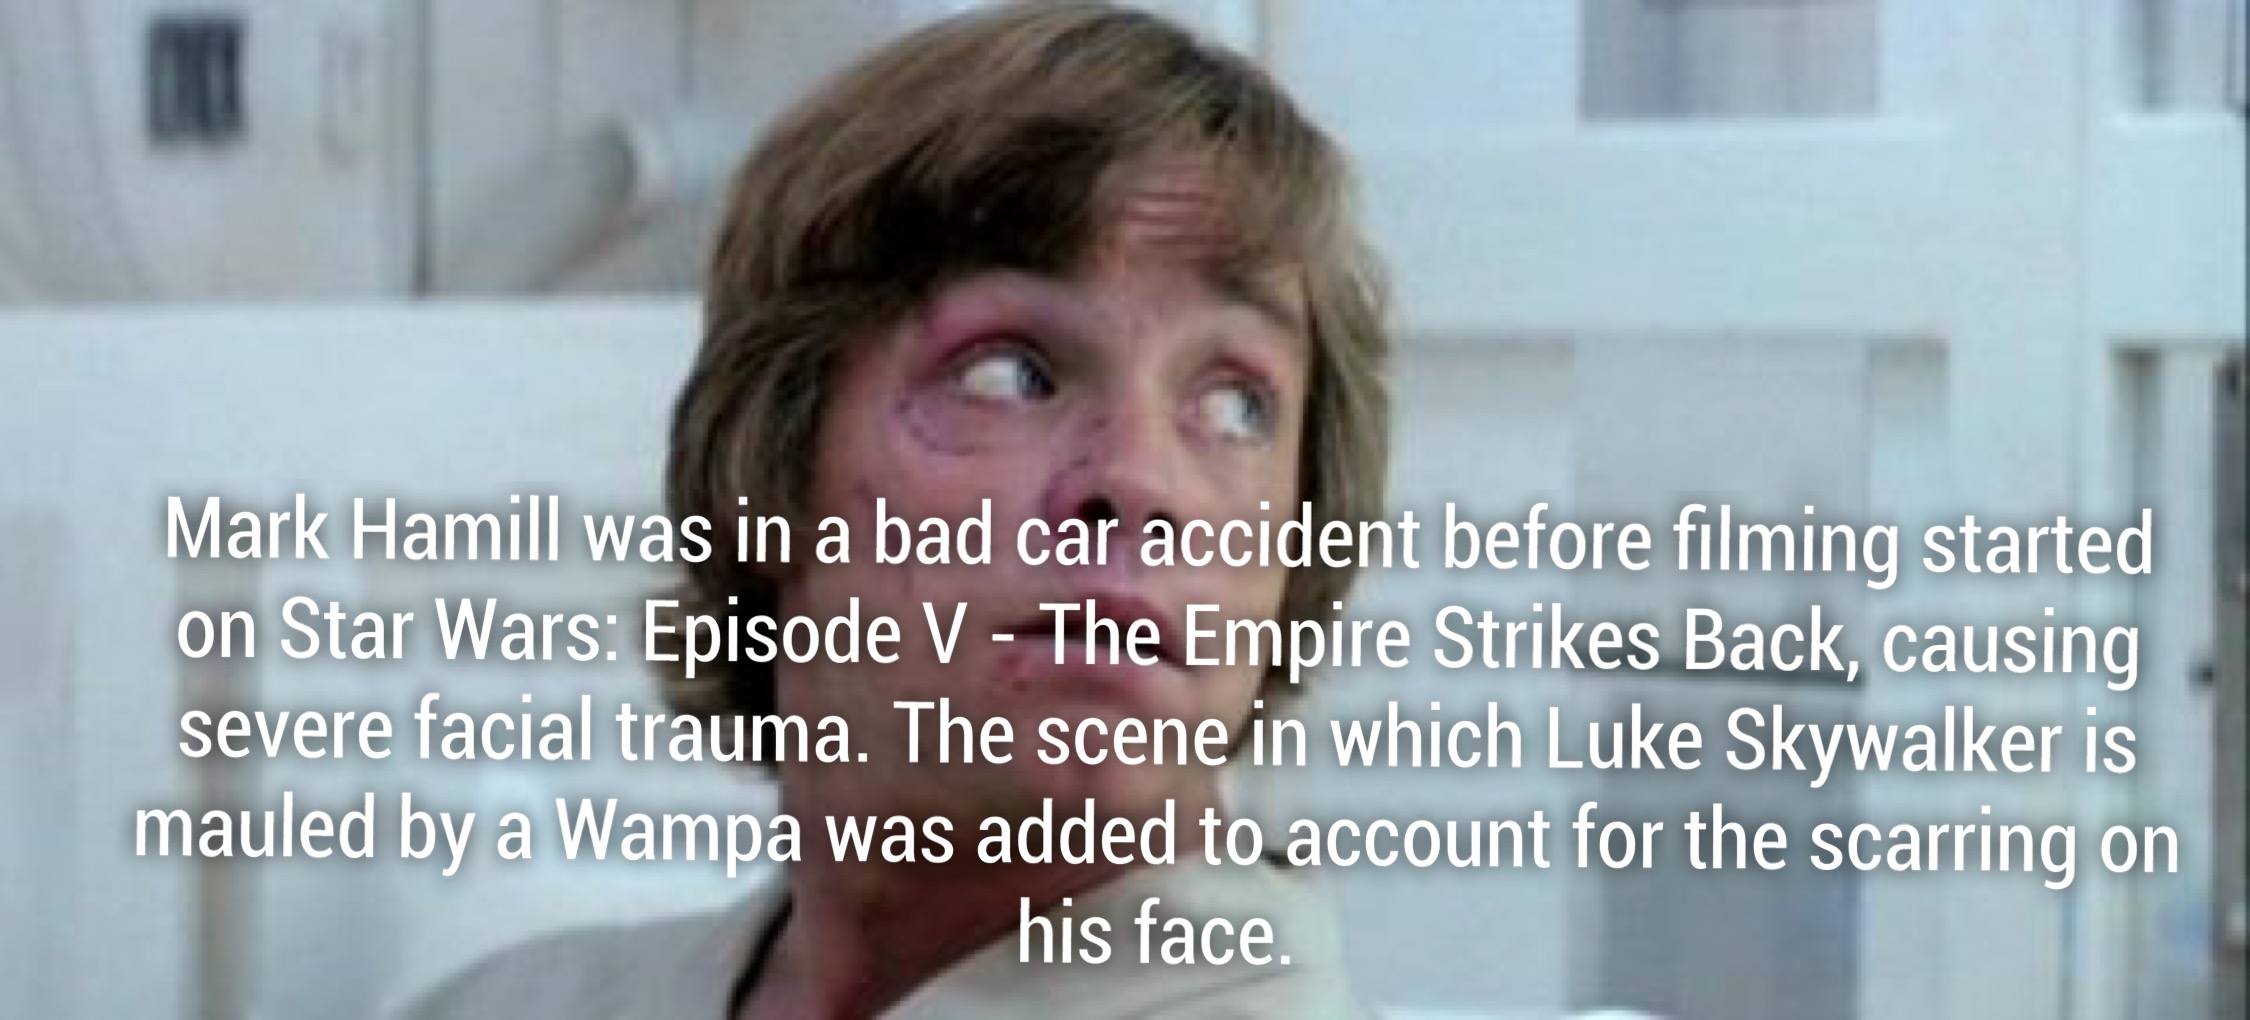 mark hamill scar - Mark Hamill was in a bad car accident before filming started on Star Wars Episode V The Empire Strikes Back, causing severe facial trauma. The scene in which Luke Skywalker is mauled by a Wampa was added to account for the scarring on h